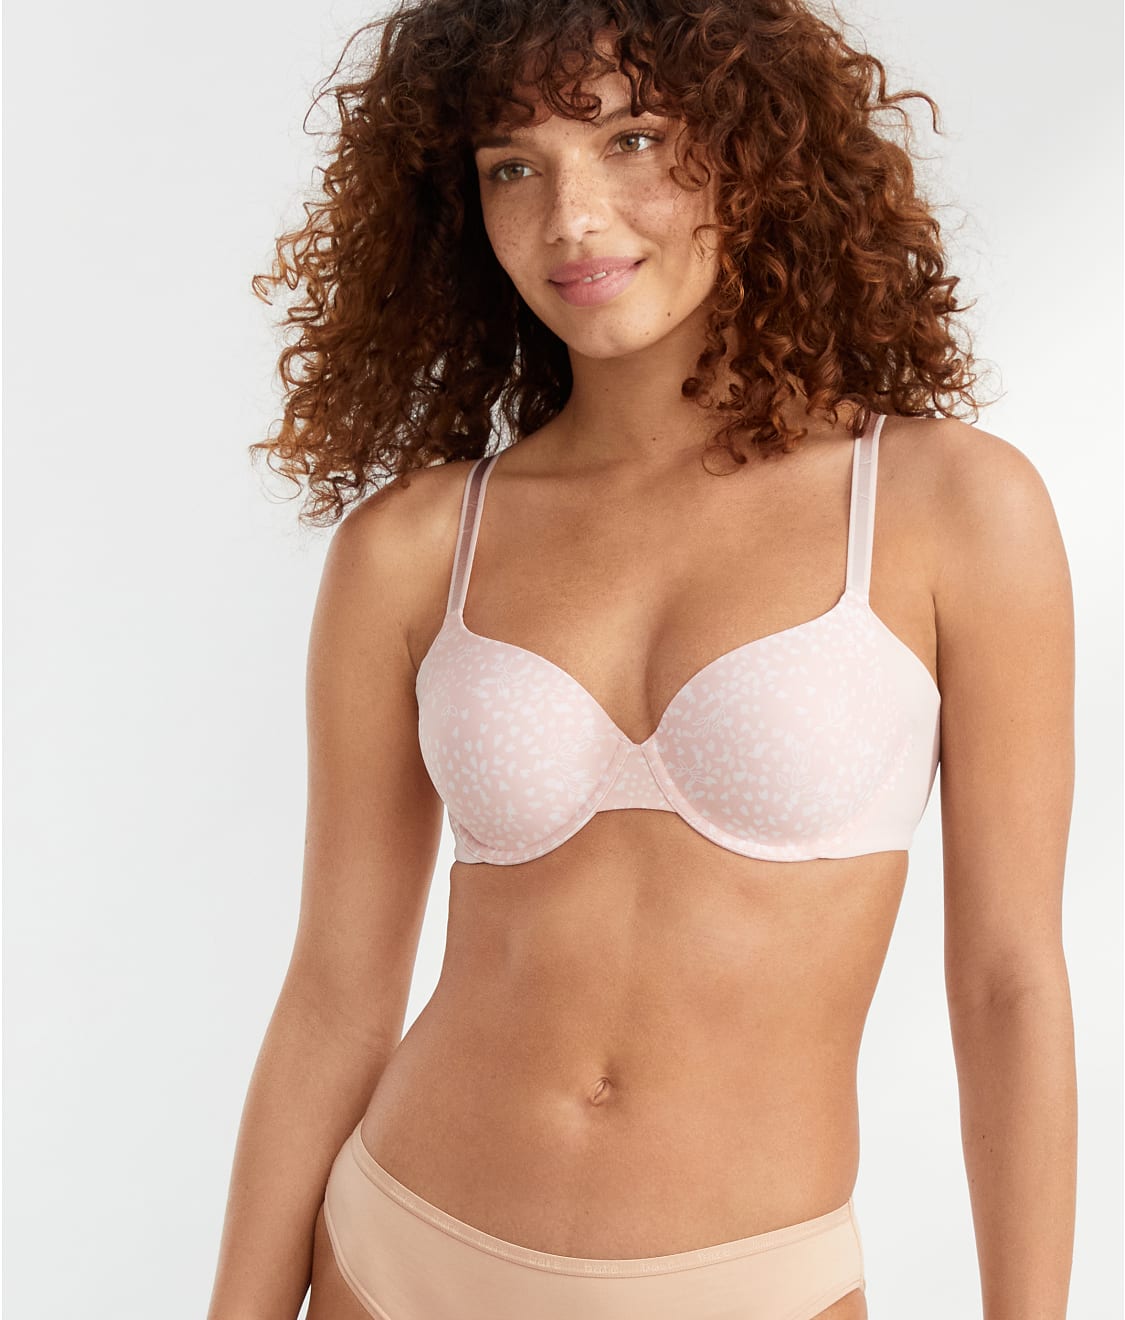 Women No Side Effects Underarm-Smoothing Unlined T-Shirt Bra